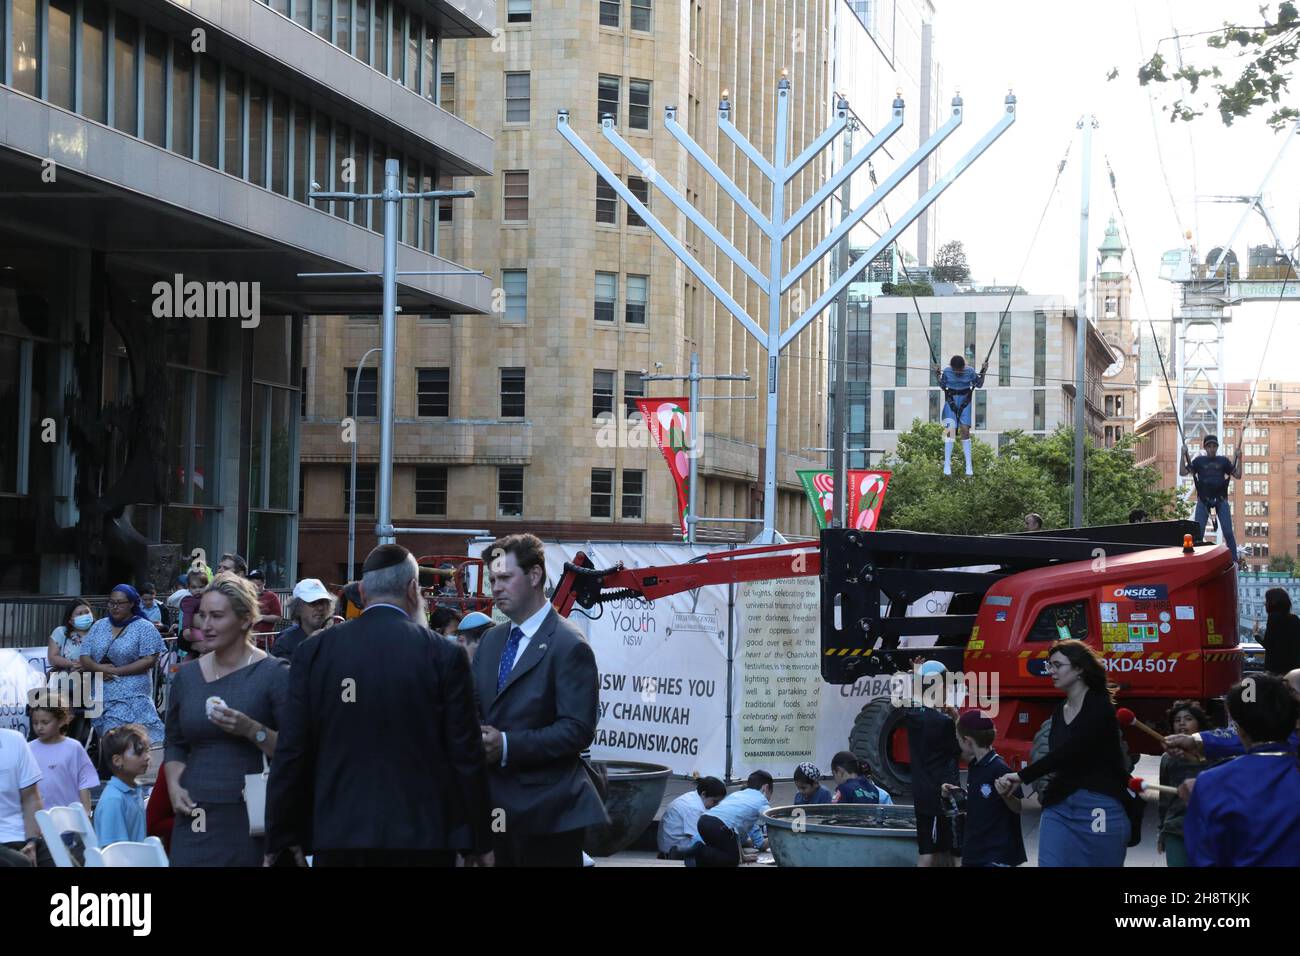 Sydney, Australia. 2nd December 2021. Hanukkah, also known as the Festival of Lights, is a Jewish festival commemorating the recovery of Jerusalem and subsequent rededication of the Second Temple at the beginning of the Maccabean revolt against the Seleucid Empire in the 2nd century BCE. Credit: Richard Milnes/Alamy Live News Stock Photo